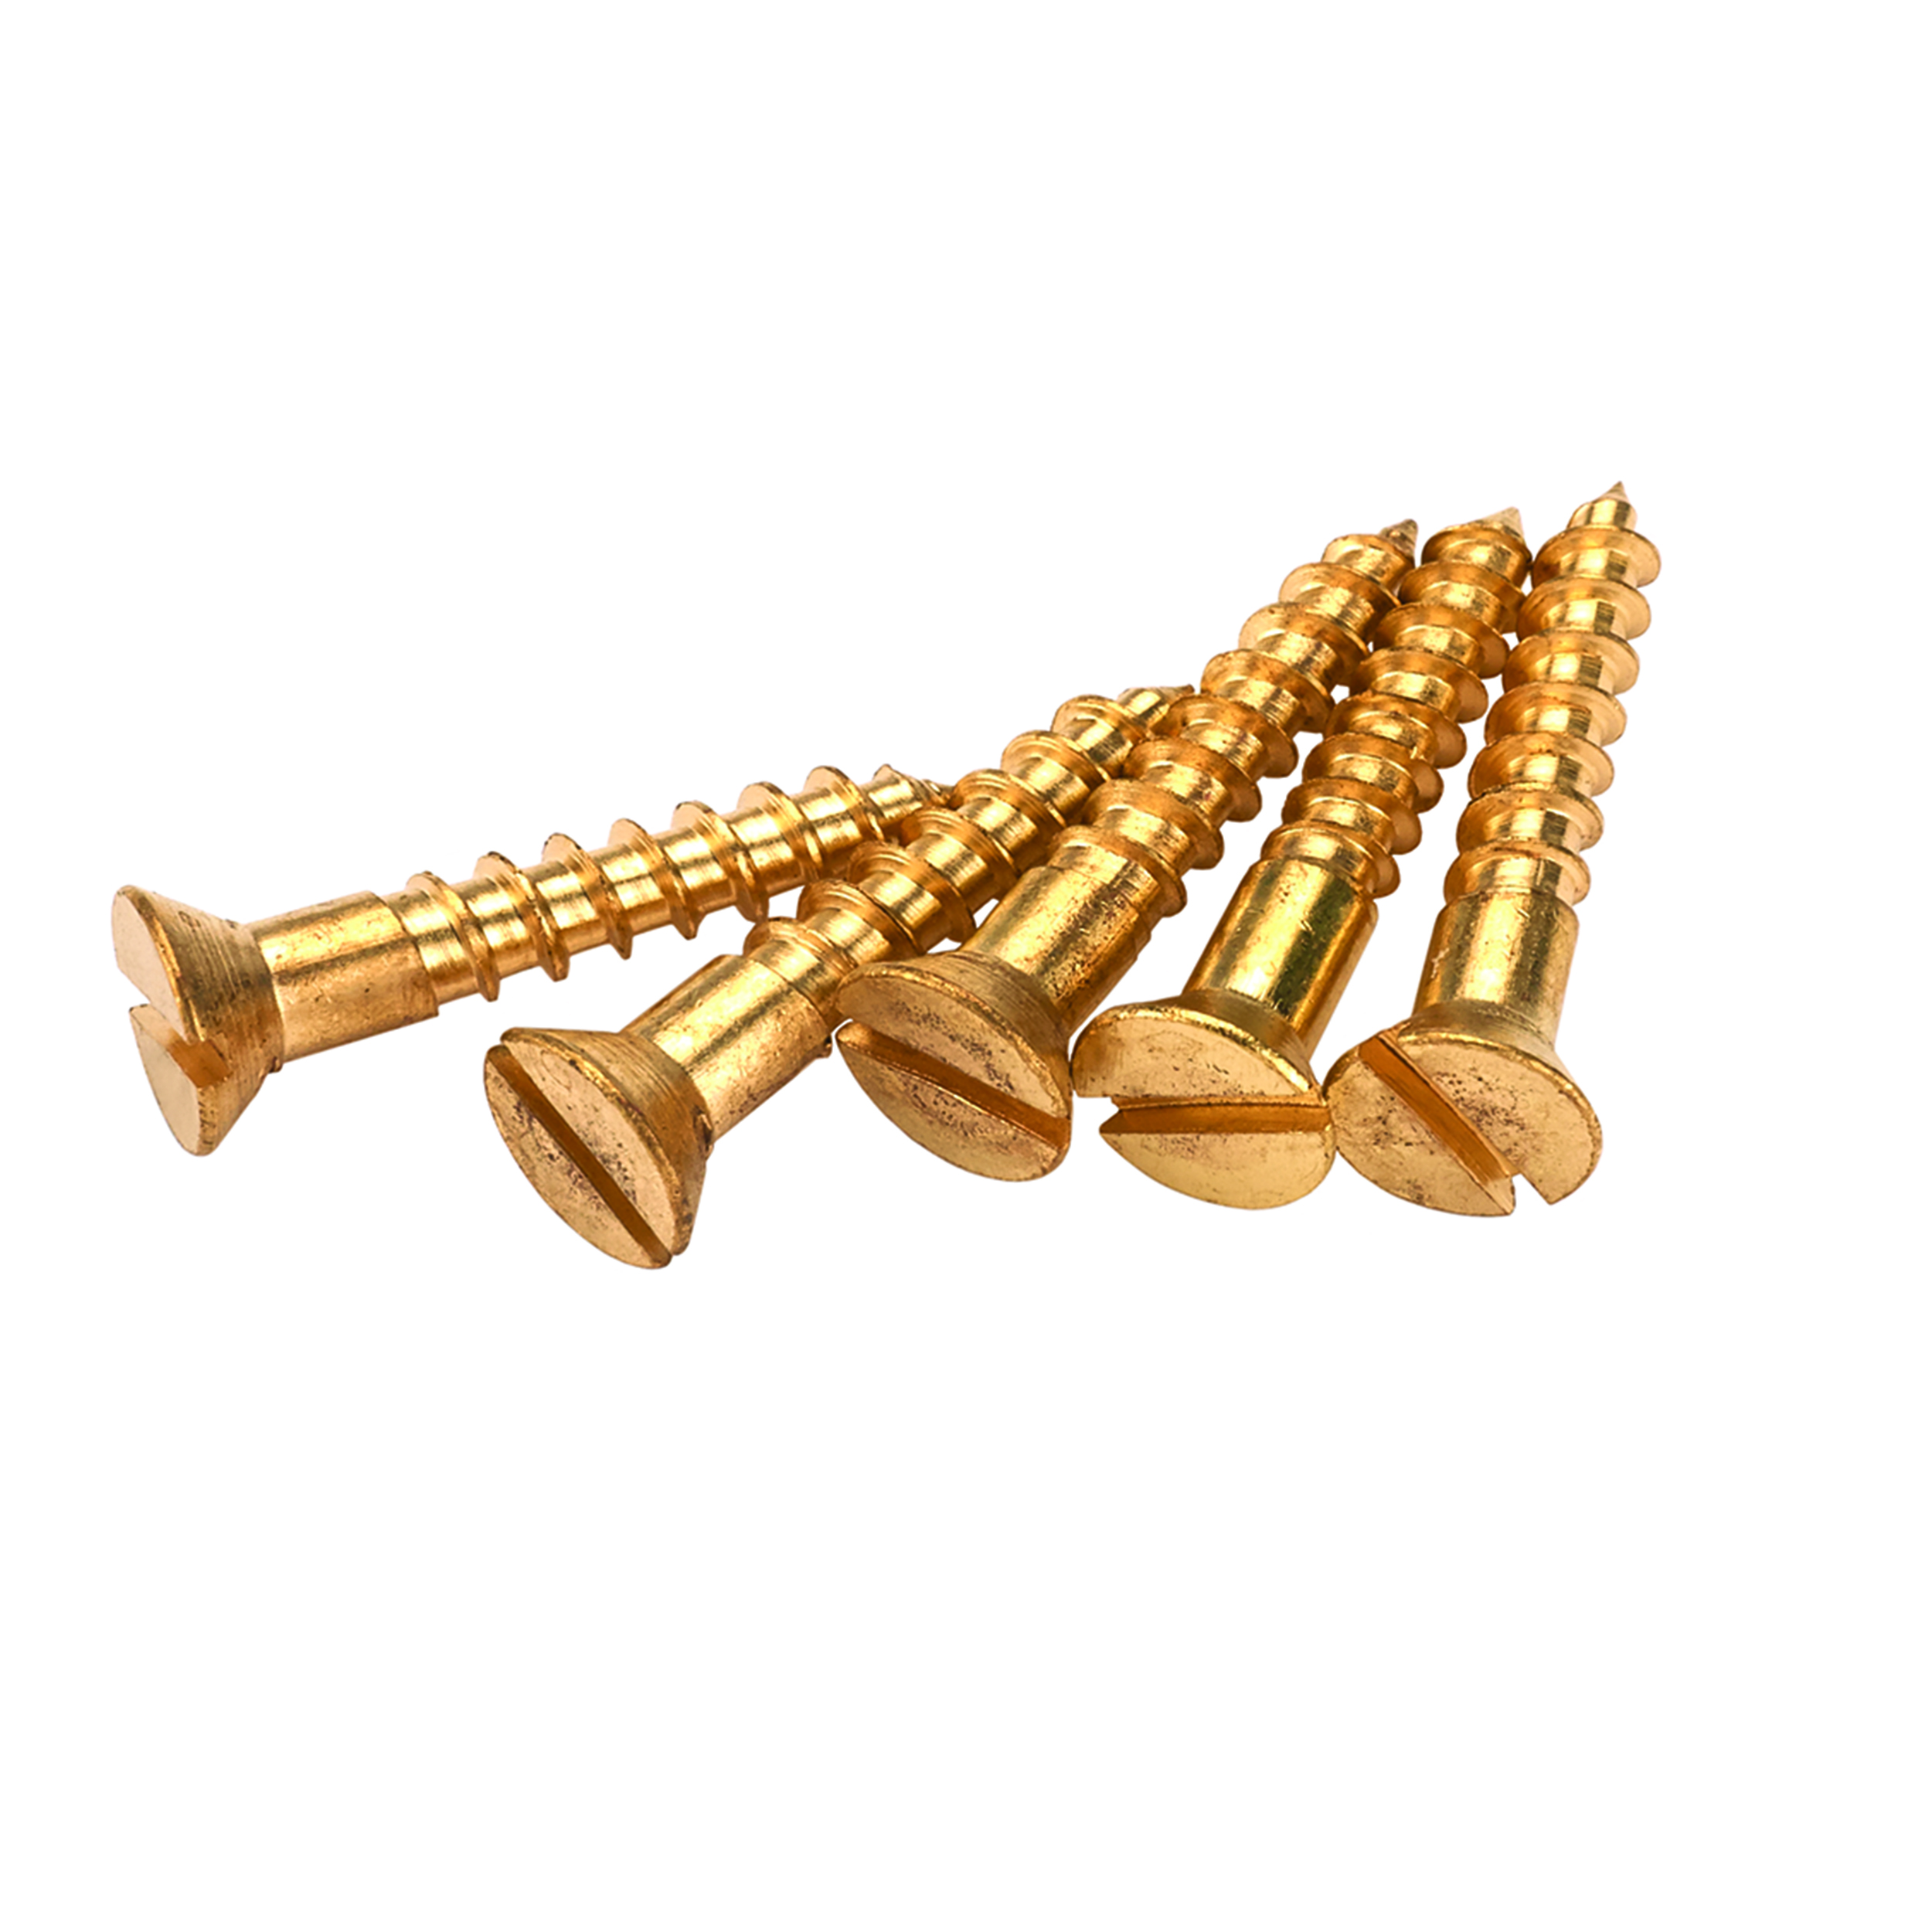 Solid Brass Screws #4 X1/2" Slotted 25-piece